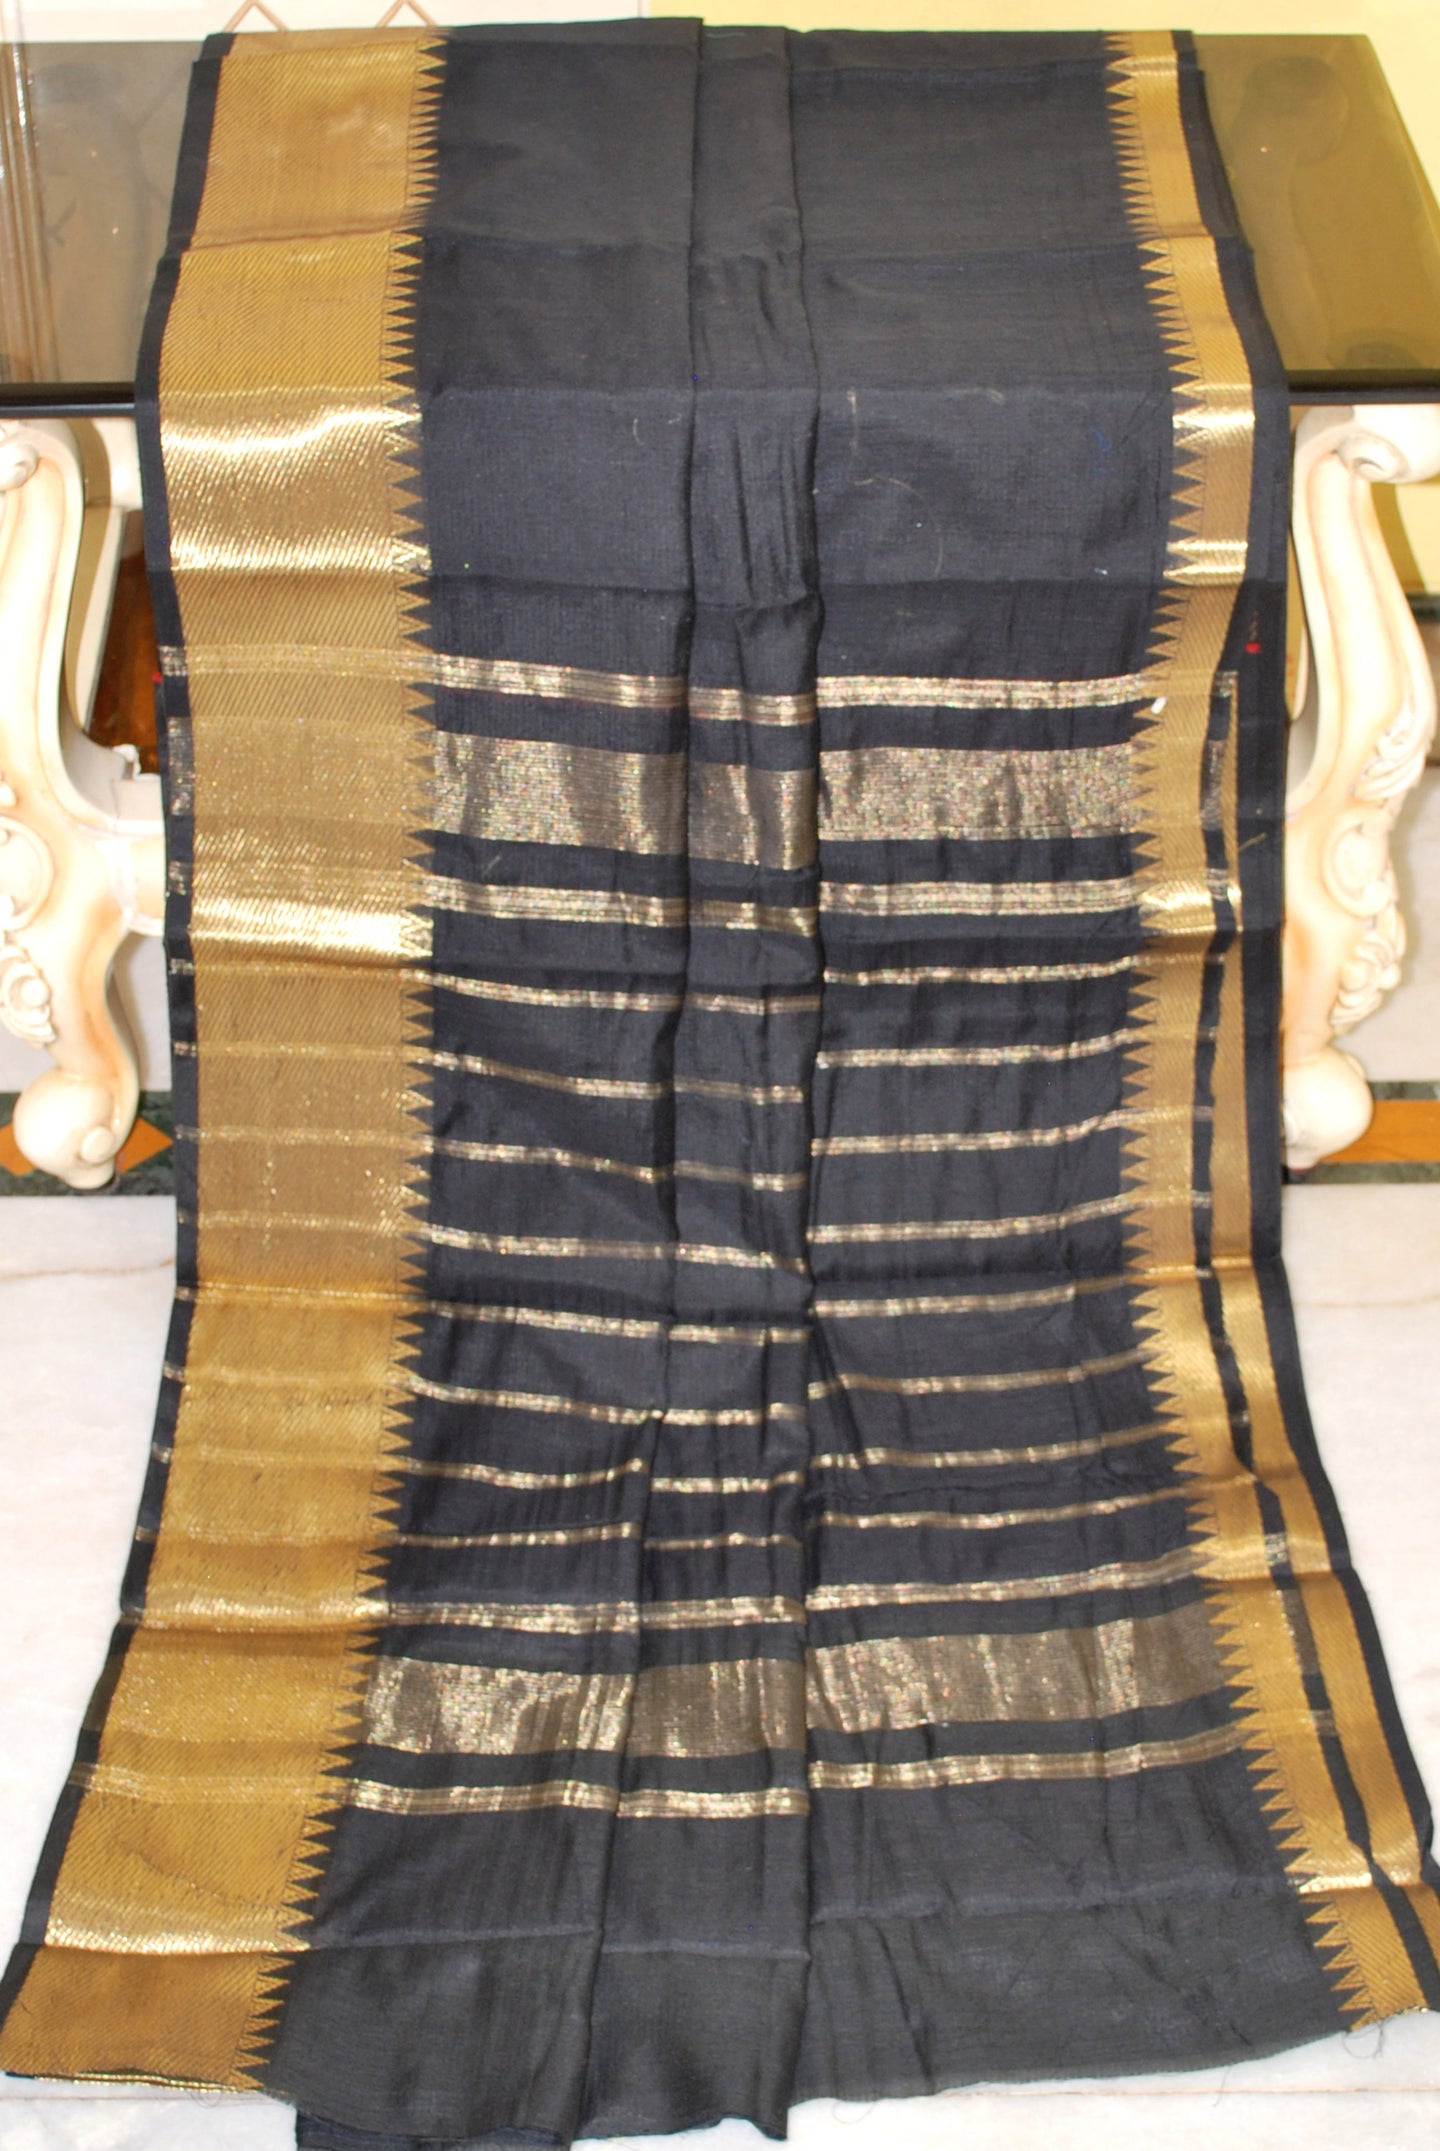 Mangalagiri Soft South Cotton Sarees with Woven Thread Work in Black and Gold